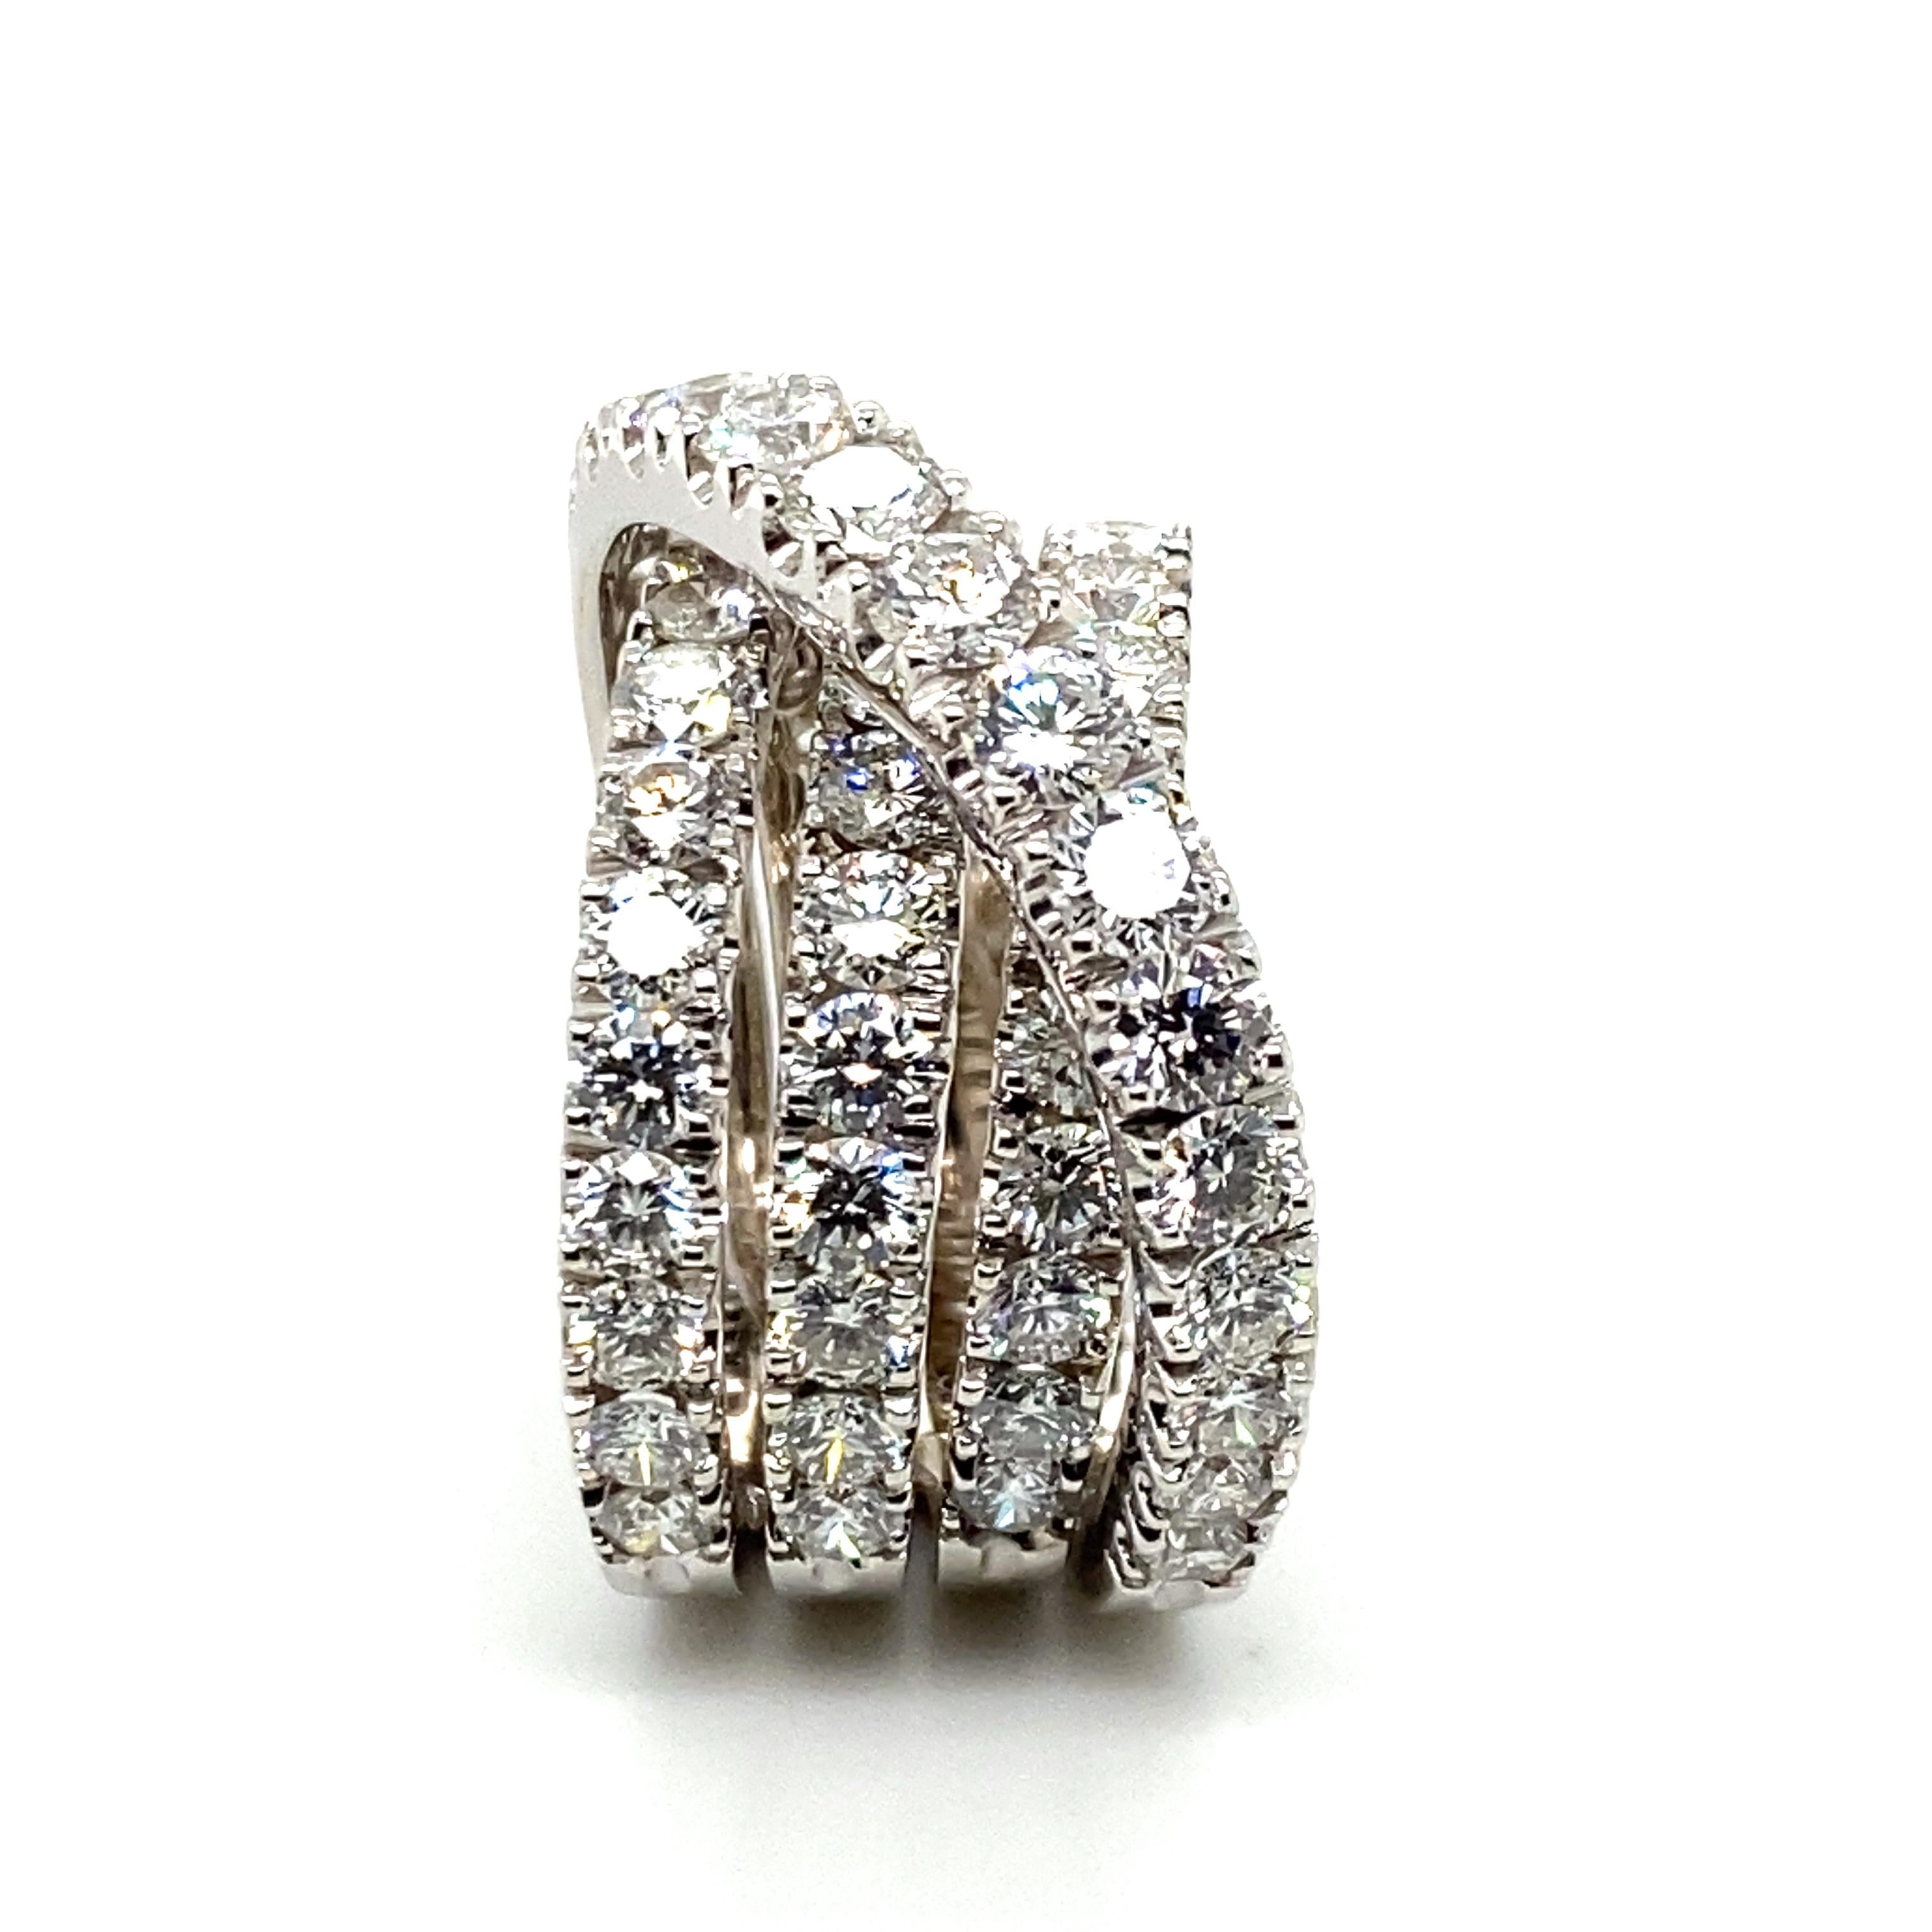 Super Sparkling Diamond Ring by Crivelli in 18 Karat White Gold For Sale 7